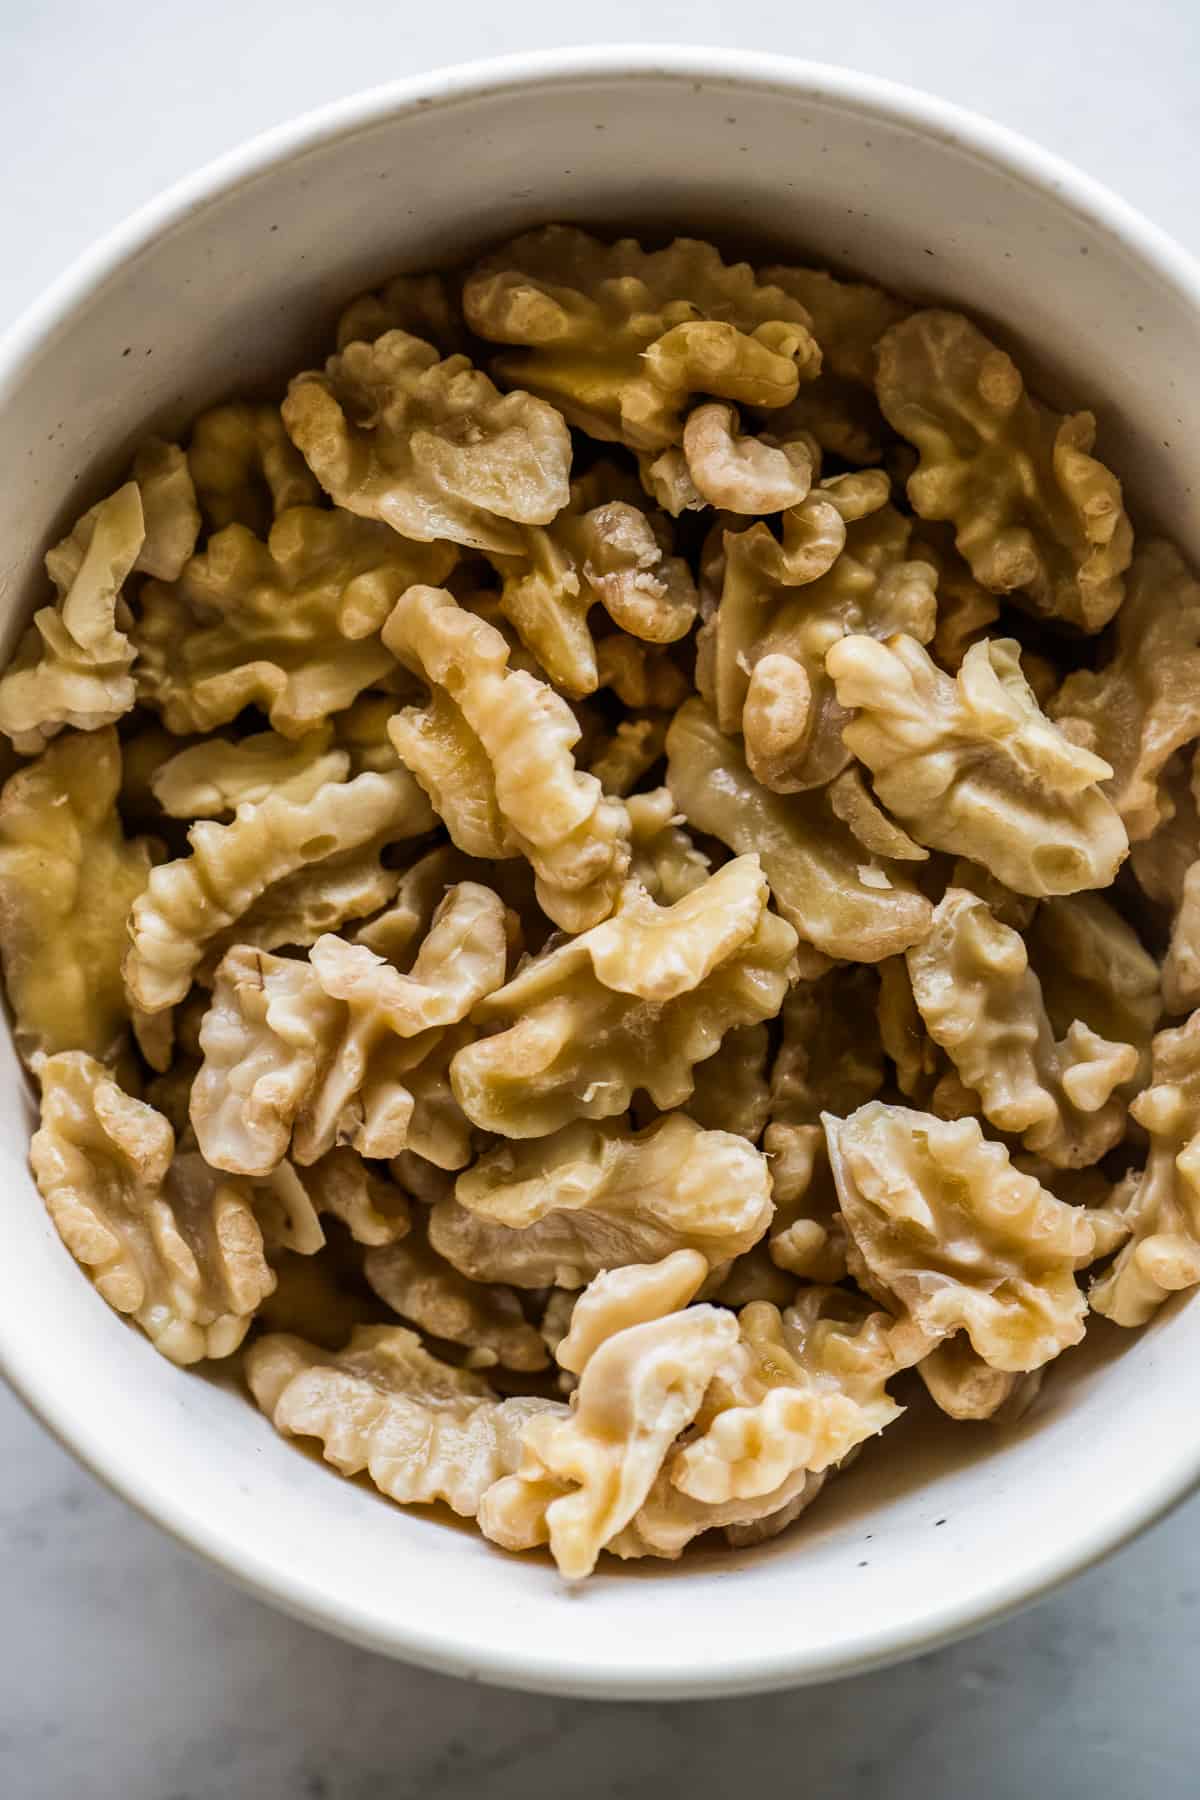 Shelled and skinned/peeled walnuts in a bowl.